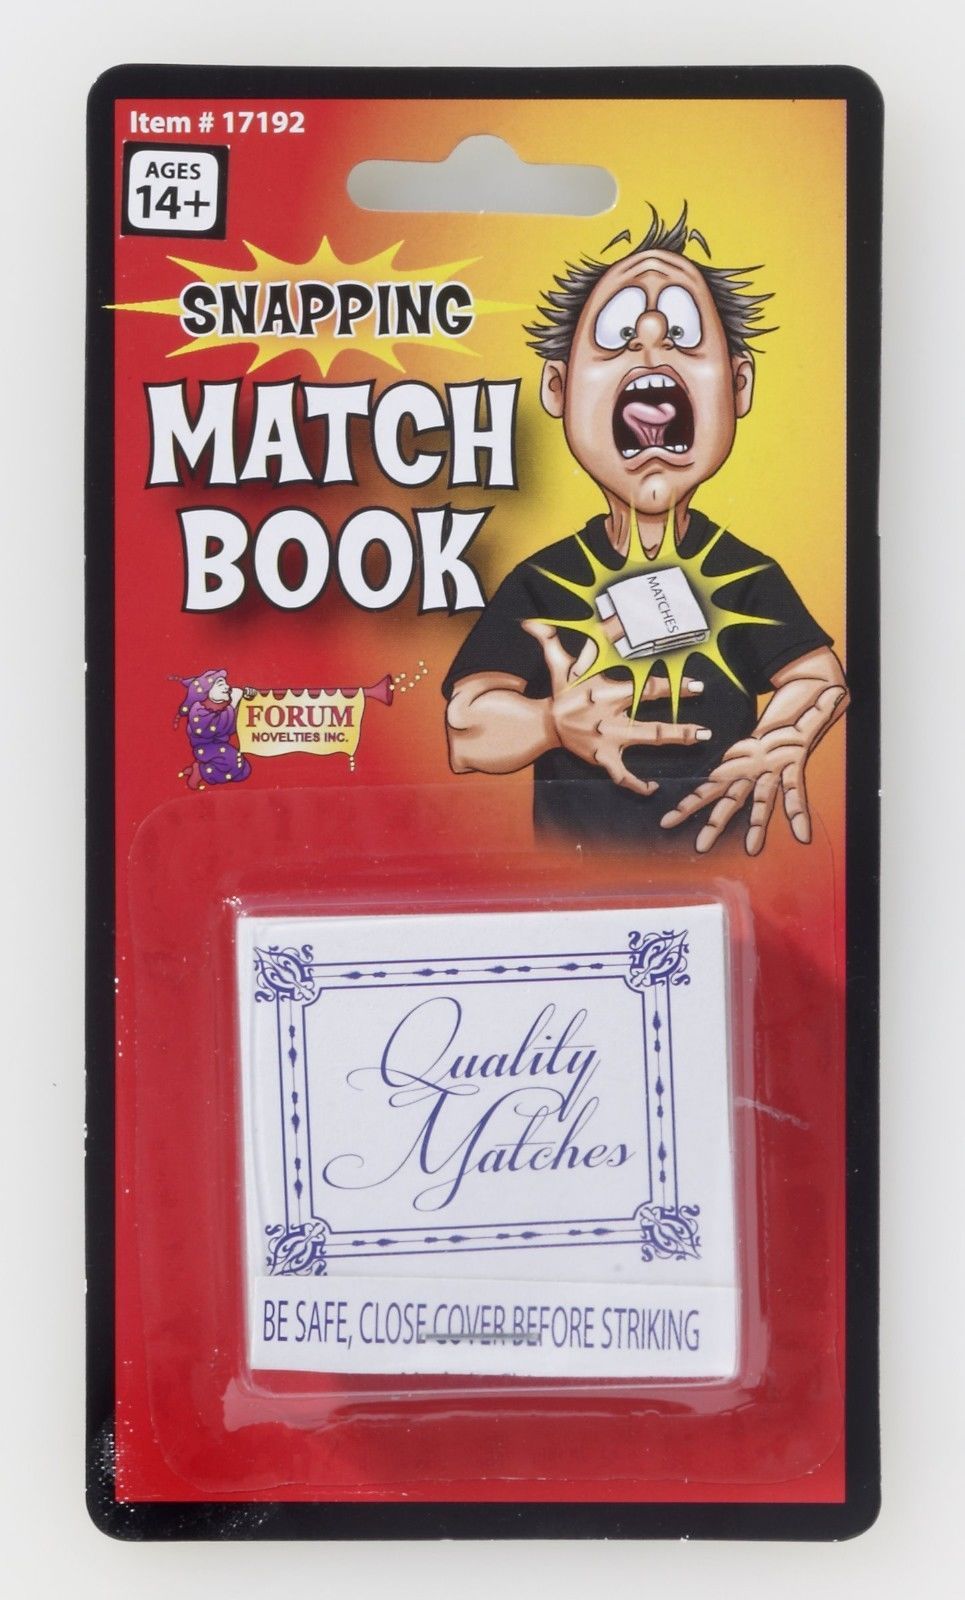 Snapping Match Book - Looks Like A Real Book of Matches But Will Surprise Them! - $1.97